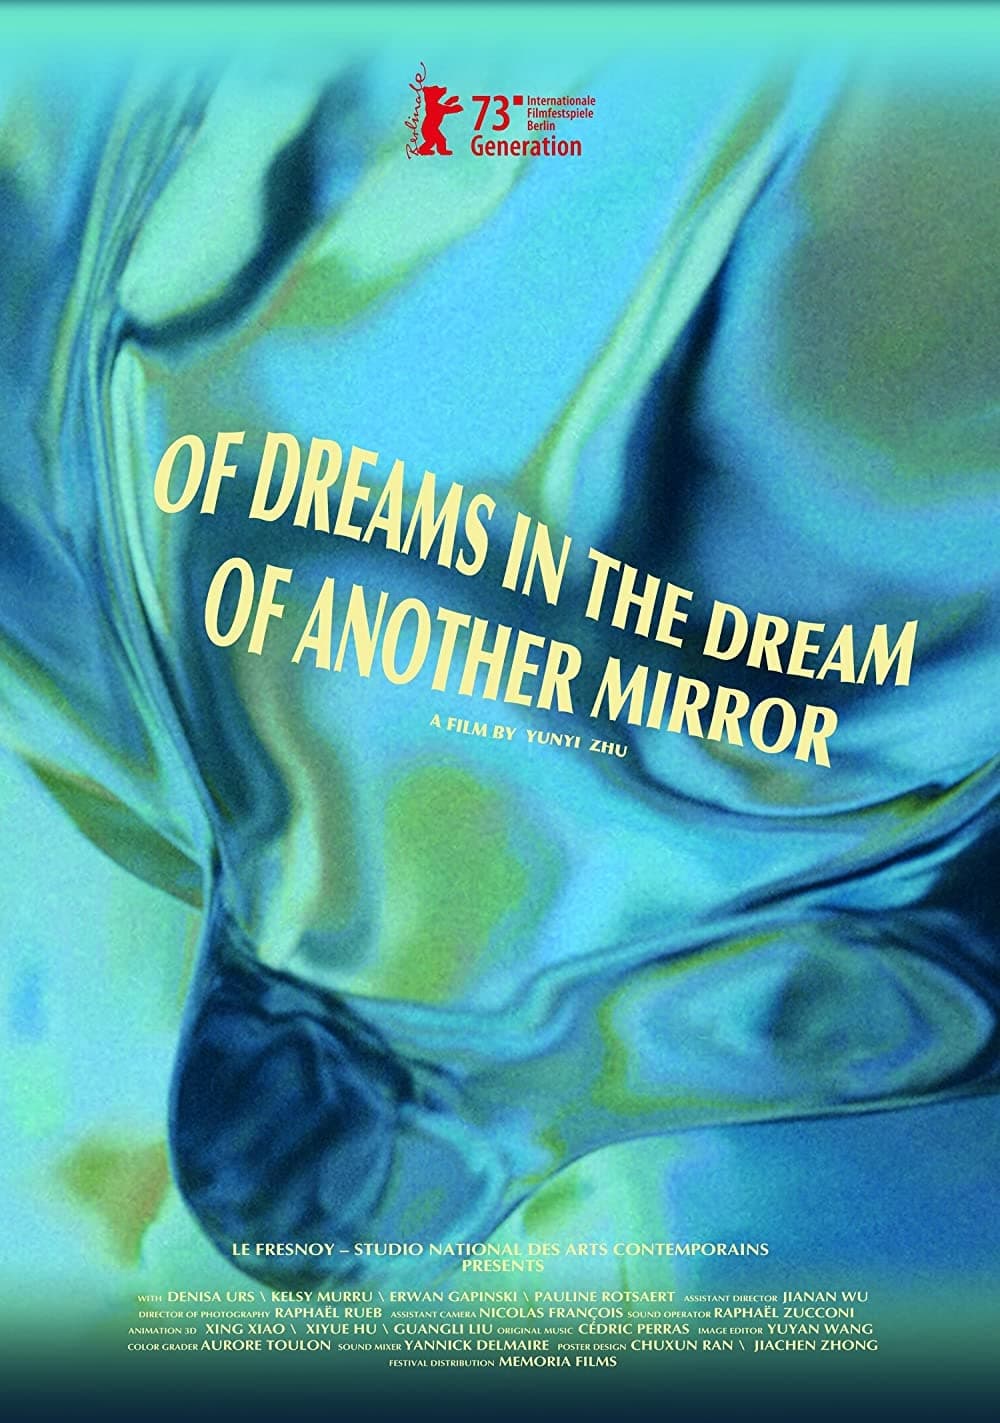 Of Dreams in the Dream of Another Mirror